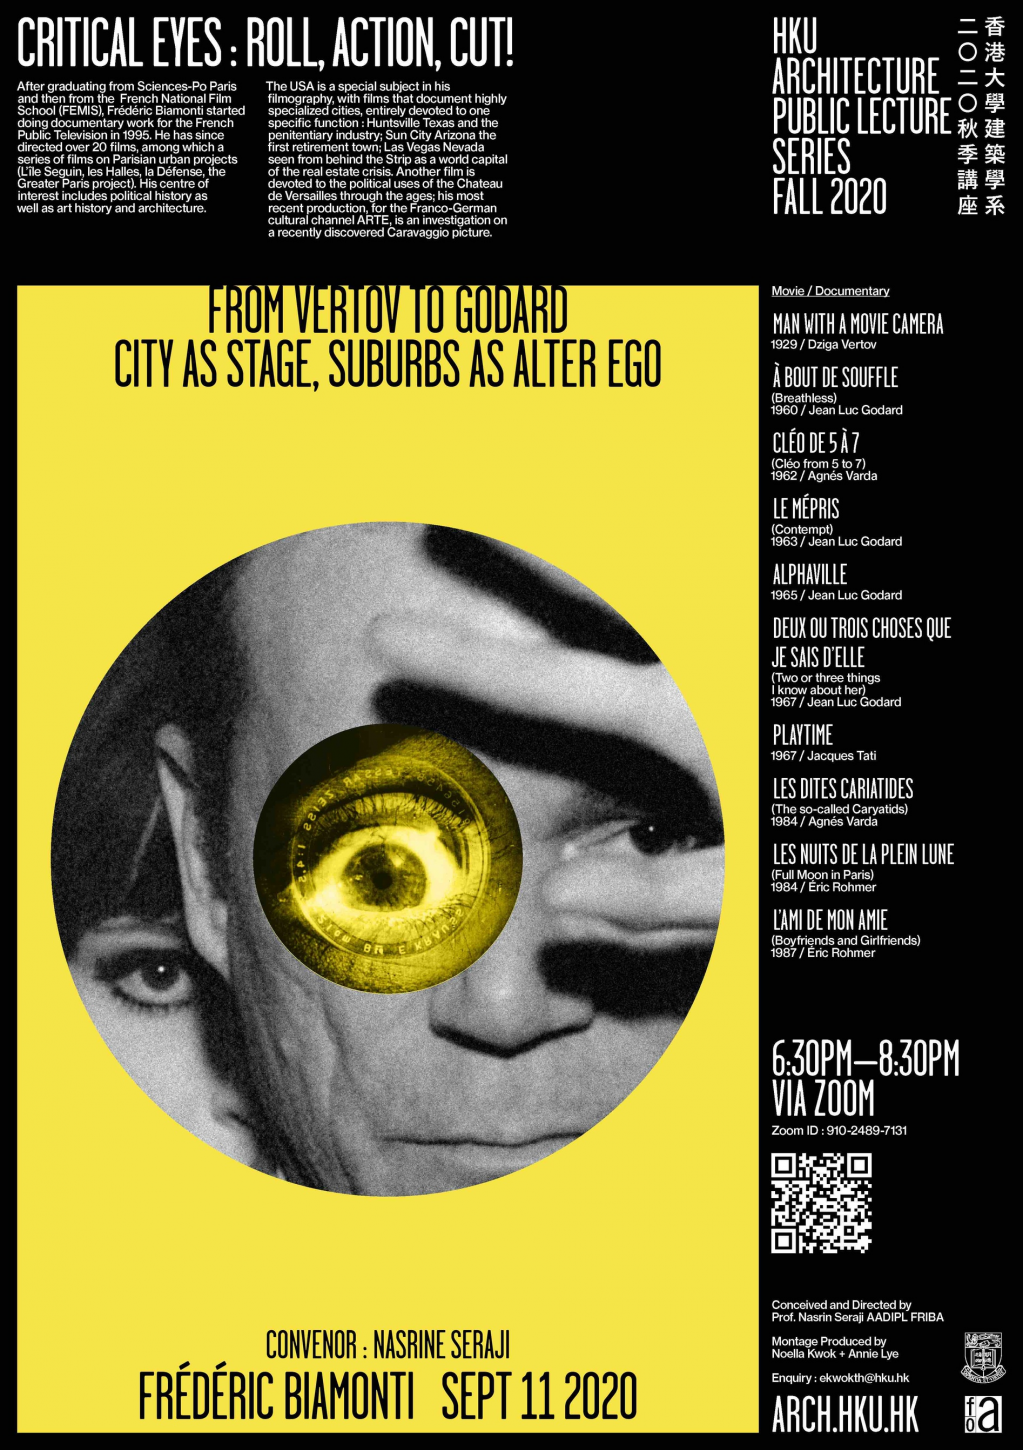 [HKU Department of Architecture] Critical Eyes: Roll, Action, Cut! - 'From Vertov to Godard - city as stage, suburbs as alter ego' by Frédéric 